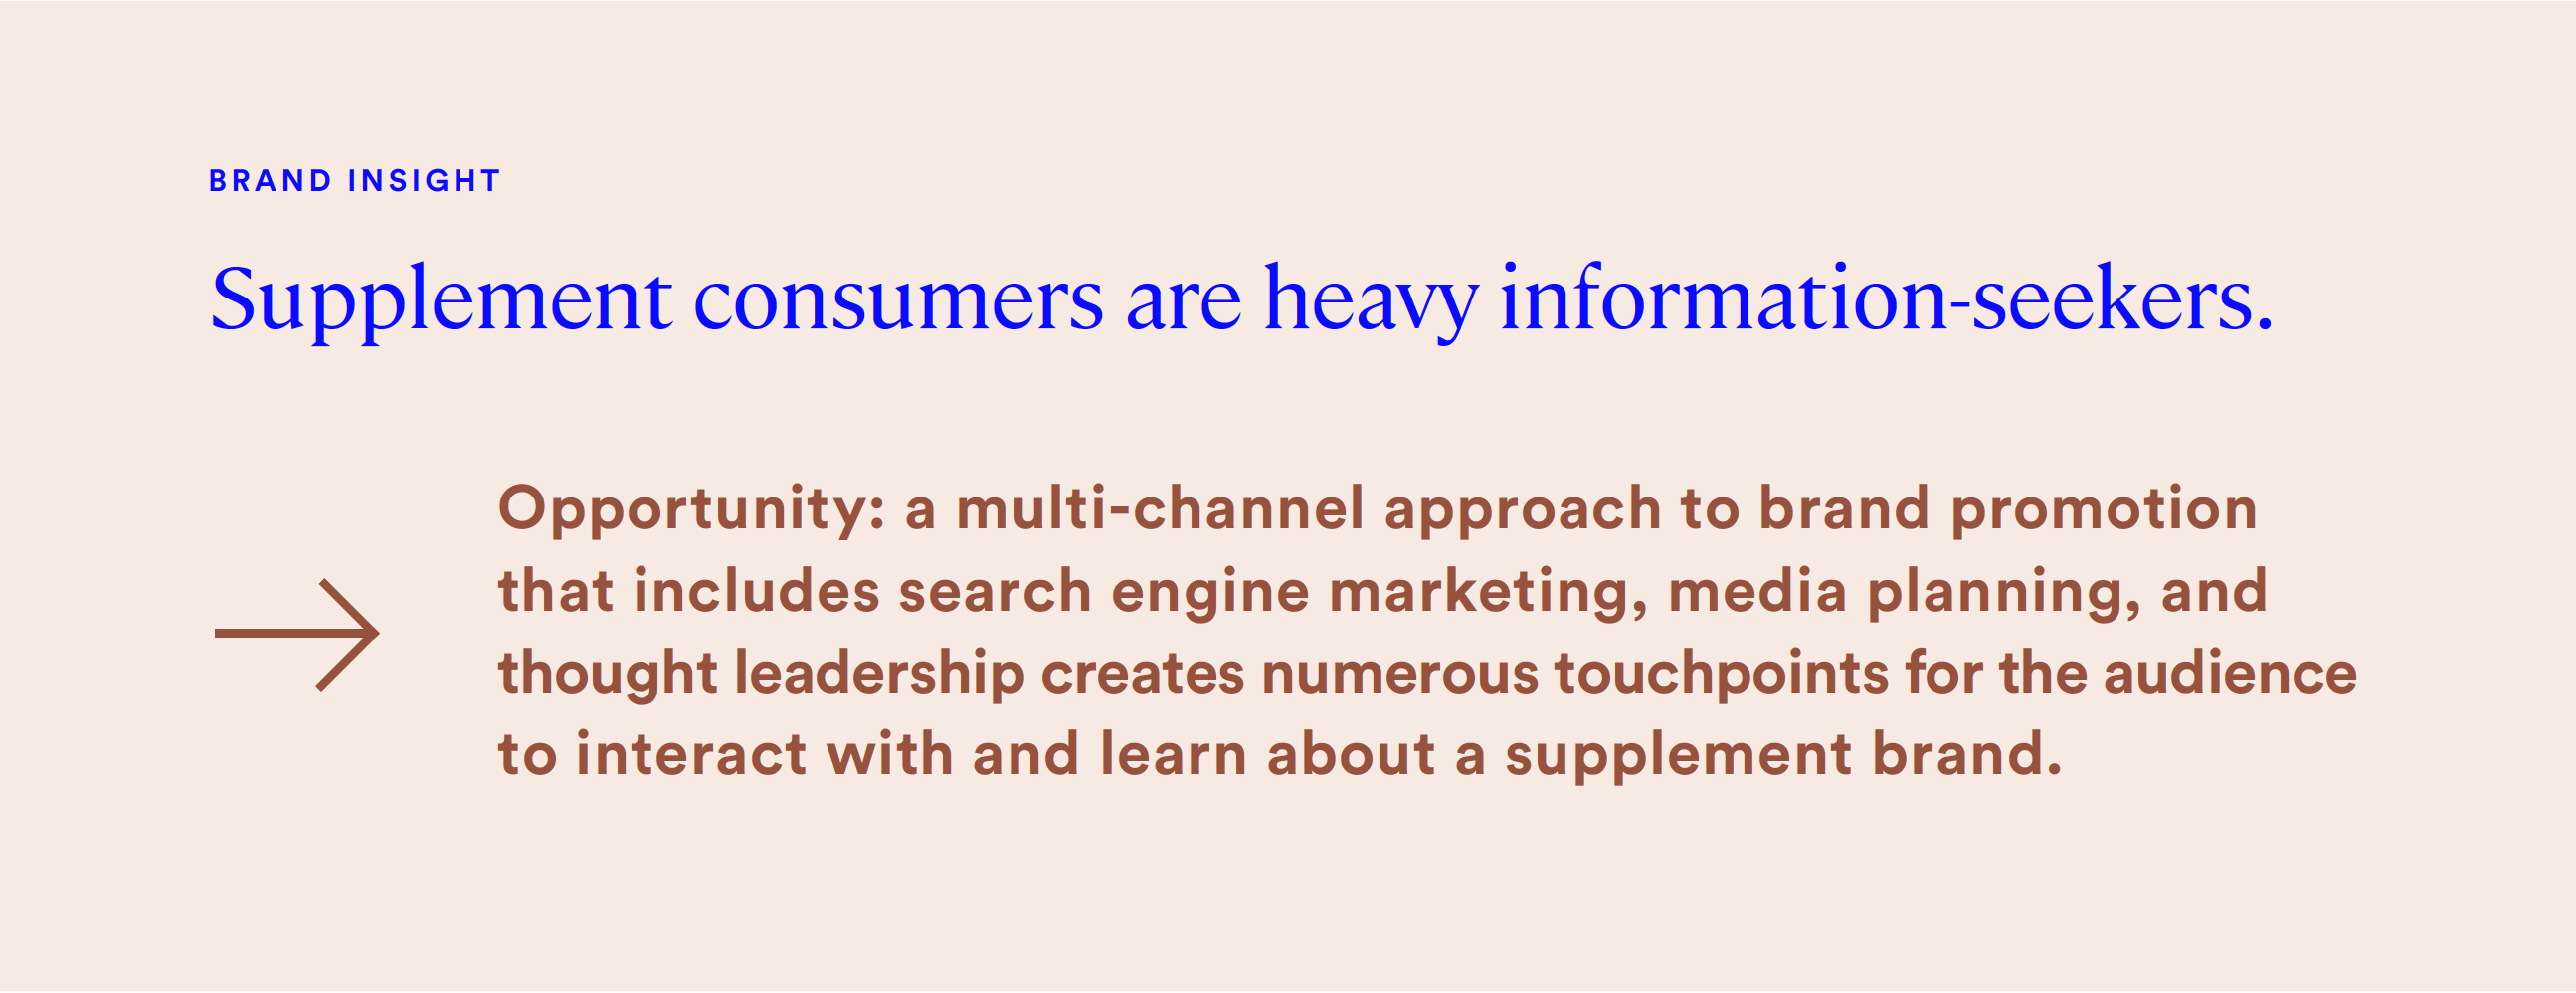 supplement consumers are heavy information-seekers. a multi-channel approach to brand promotion that includes search engine marketing, media planning, and thought leadership creates numerous touchpoints for the audience to interact with and learn about a supplement brand